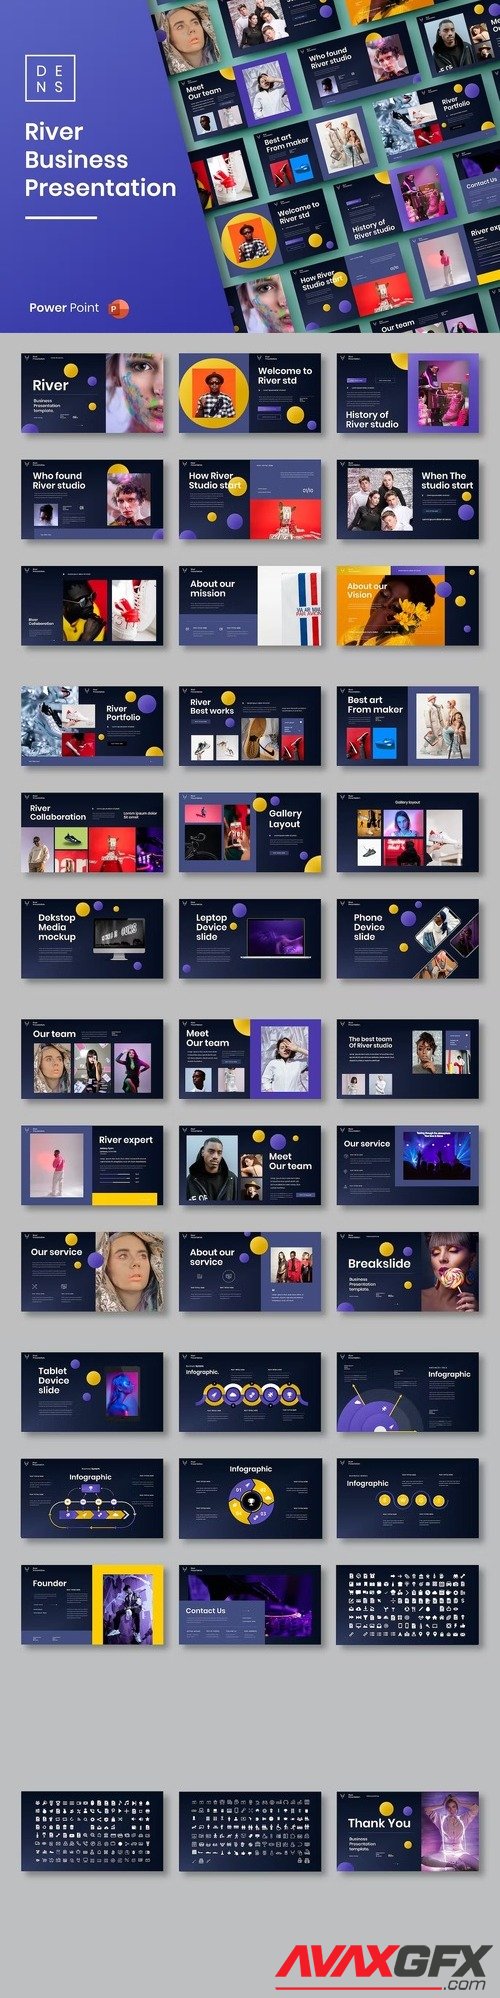 River – Business PowerPoint Template [PPTX]